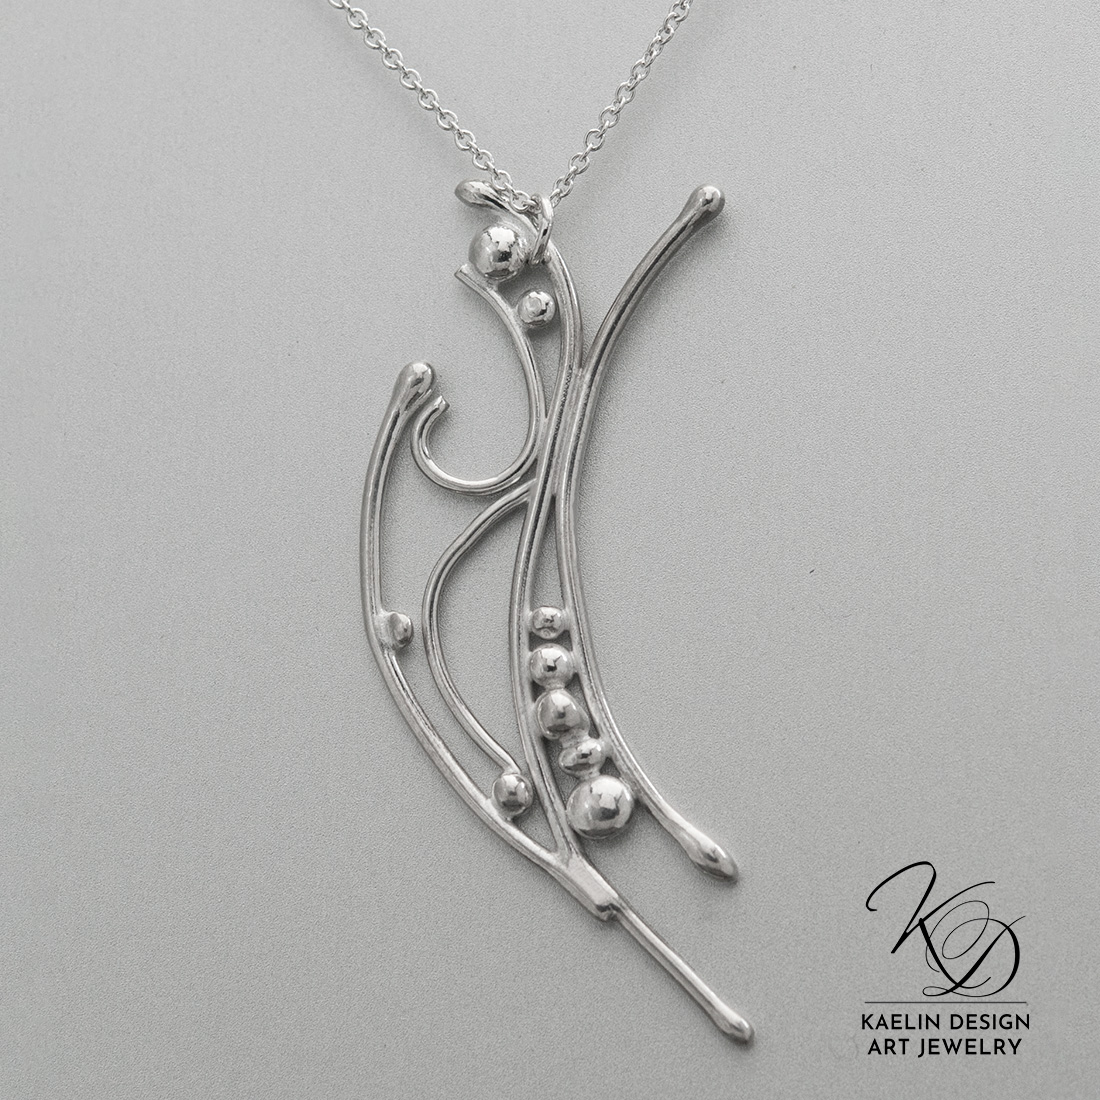 Ocean Froth Hand Forged Silver Art Jewelry Pendant by Kaelin Design